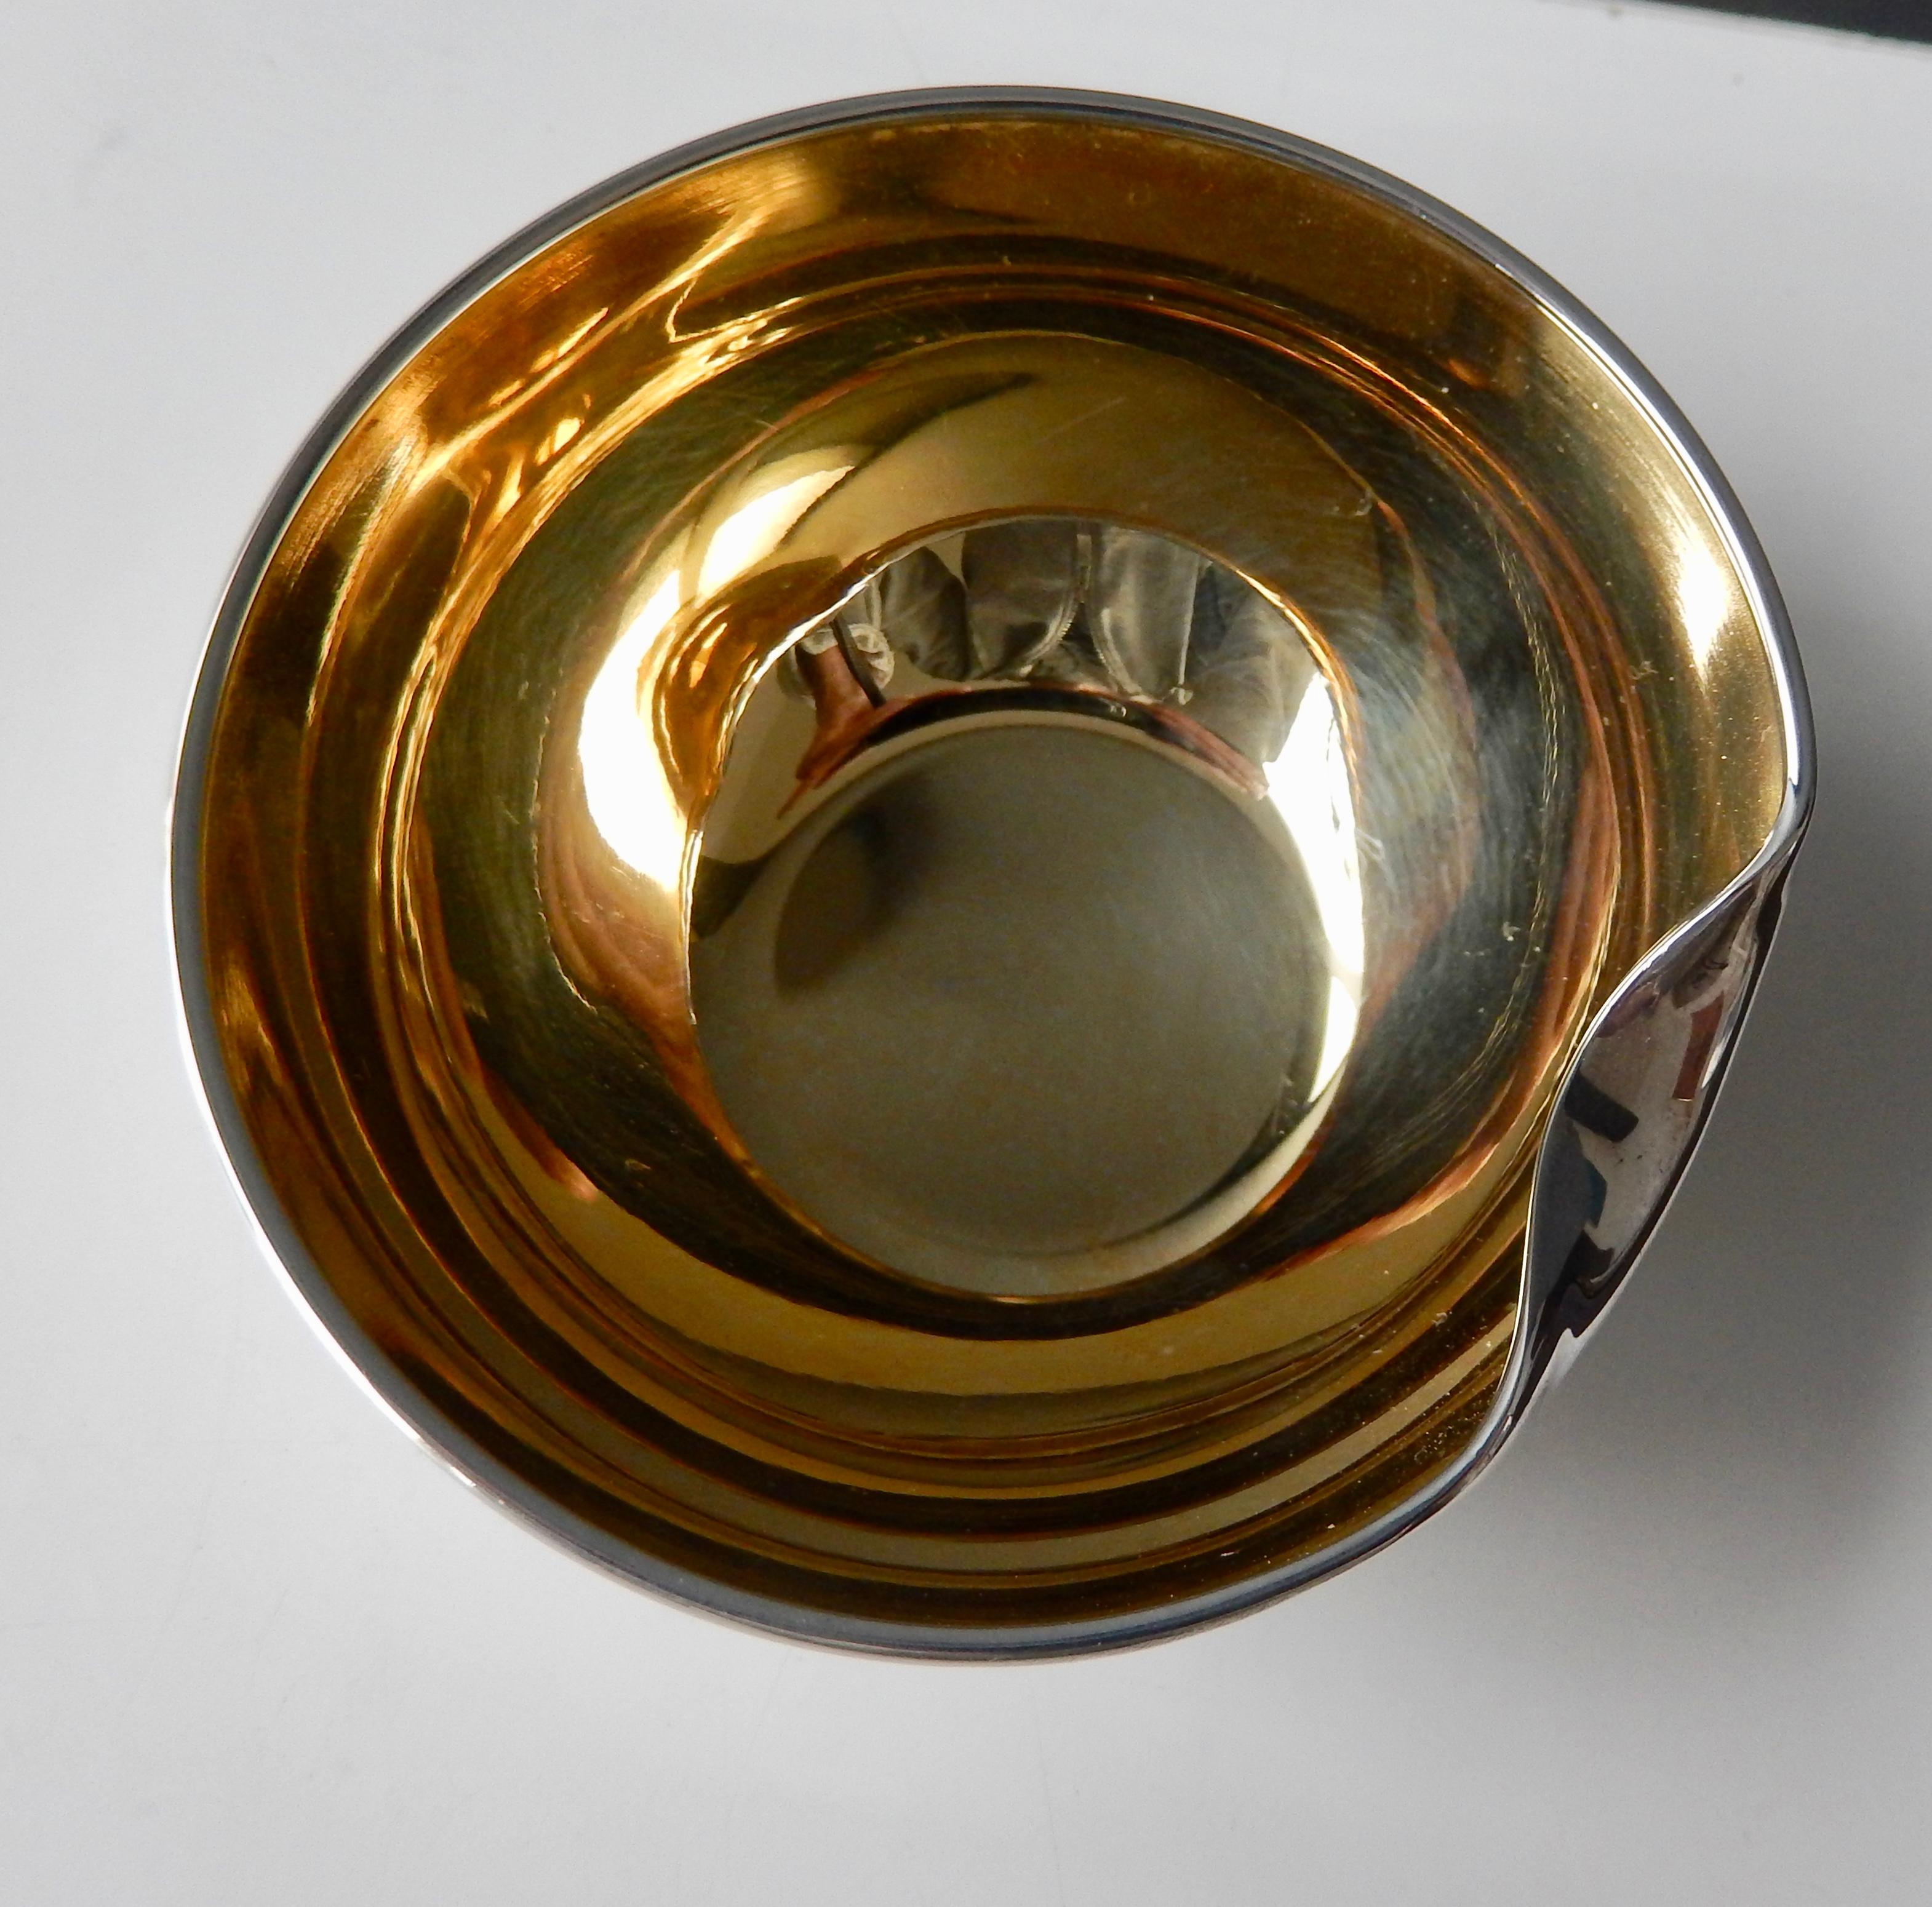 A small, luxurious sterling silver bowl with a gold vermeil interior by the well-known Tiffany & Co. designer Elsa Peretti. The bowl's simple sculptural shape, resembling a 